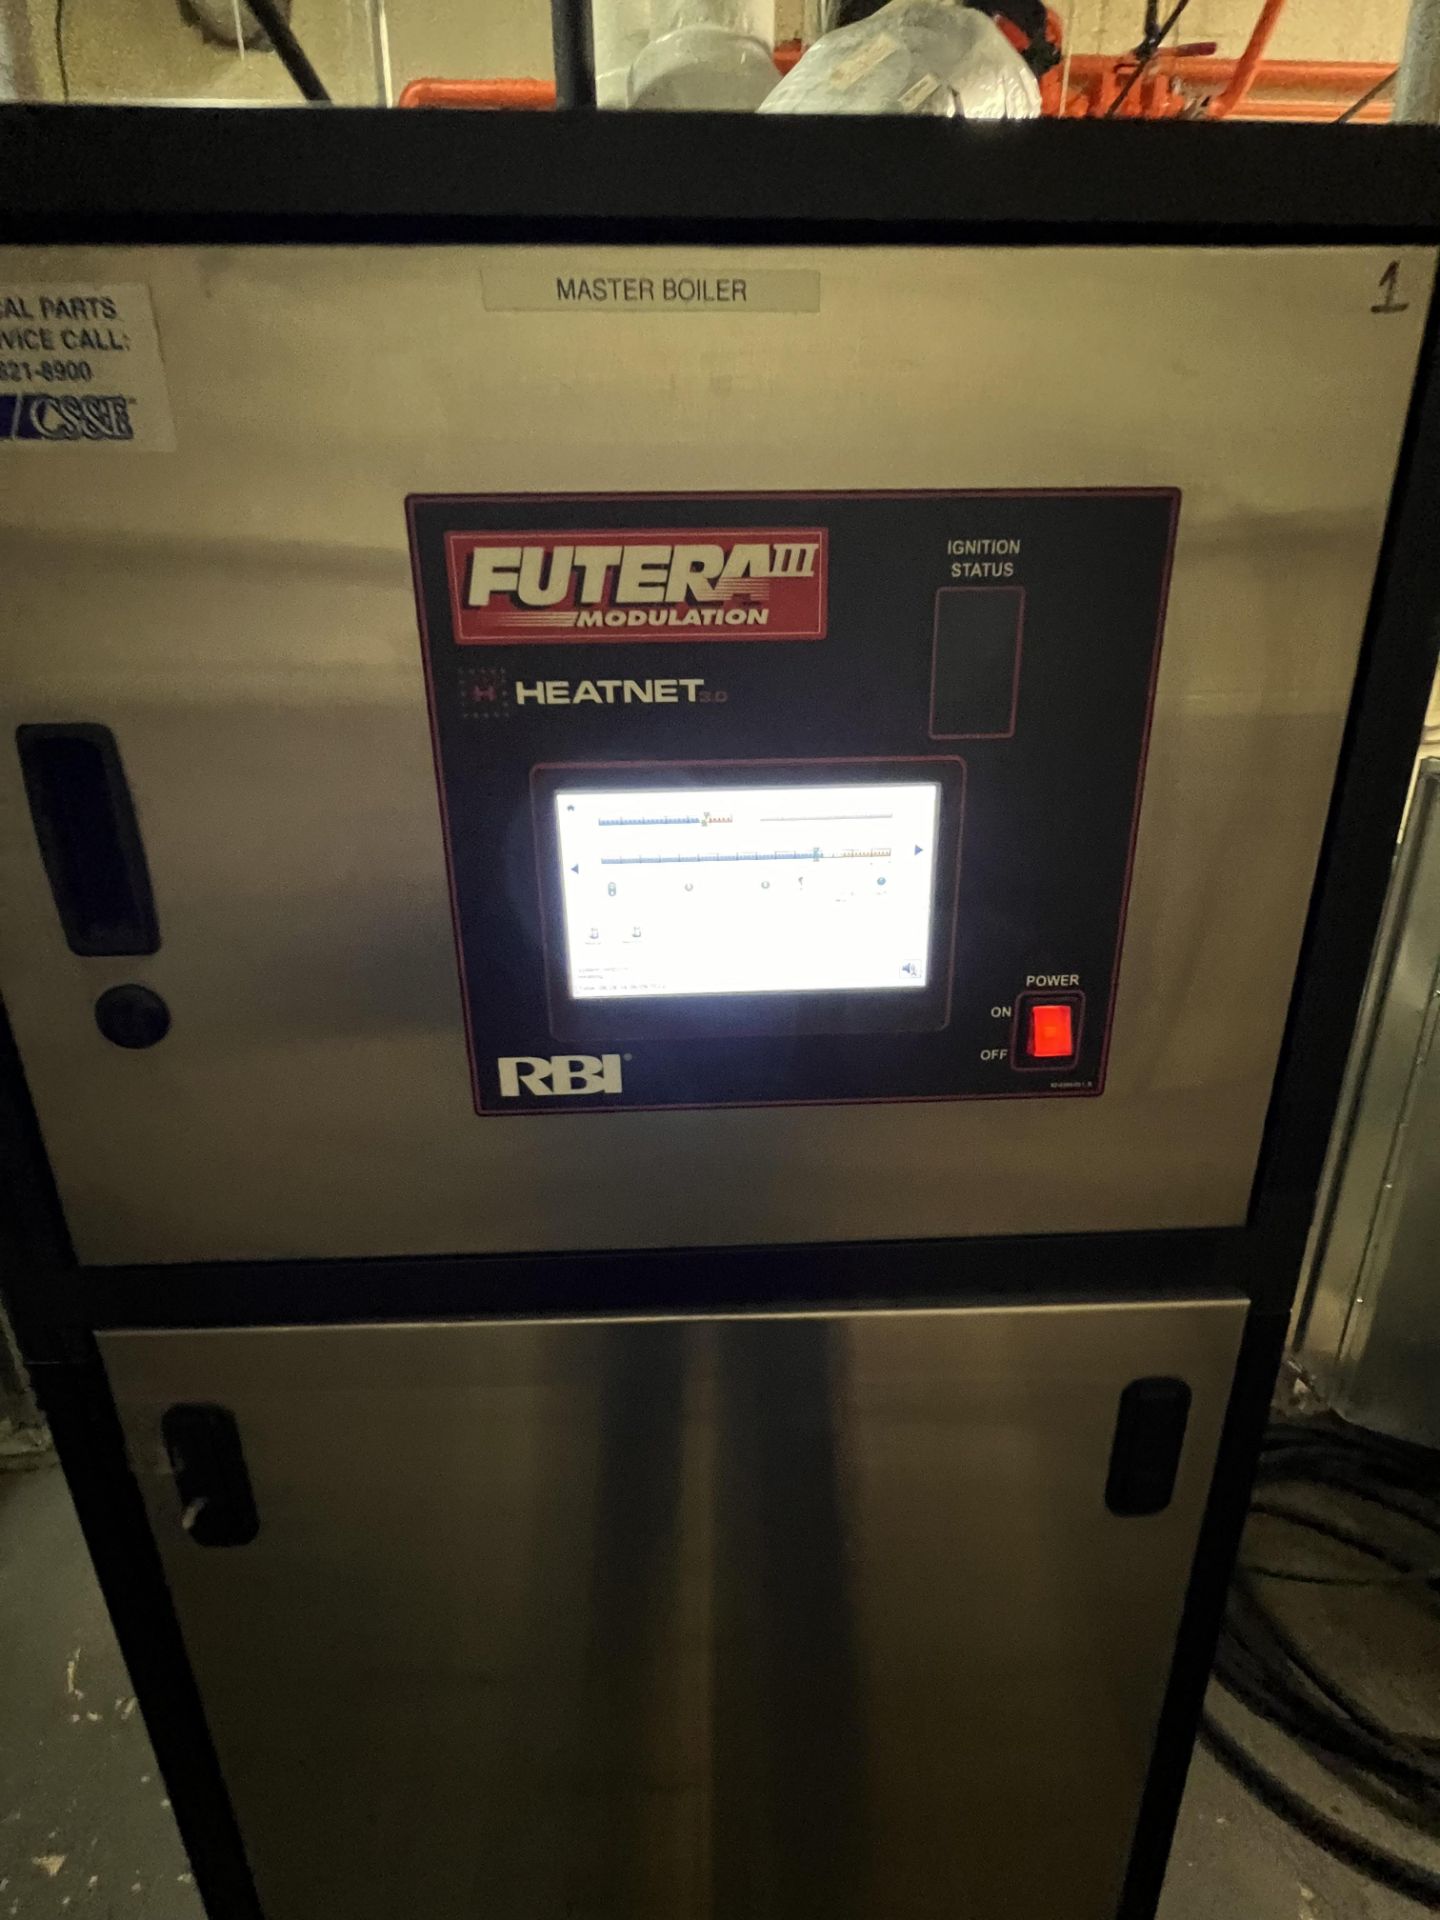 RBI FUTERA 3 NATURAL GAS BOILER, MODEL MB1000, S/N 122087110, 160 PSI, PREVIOUSLY OPERATING IN - Image 6 of 9